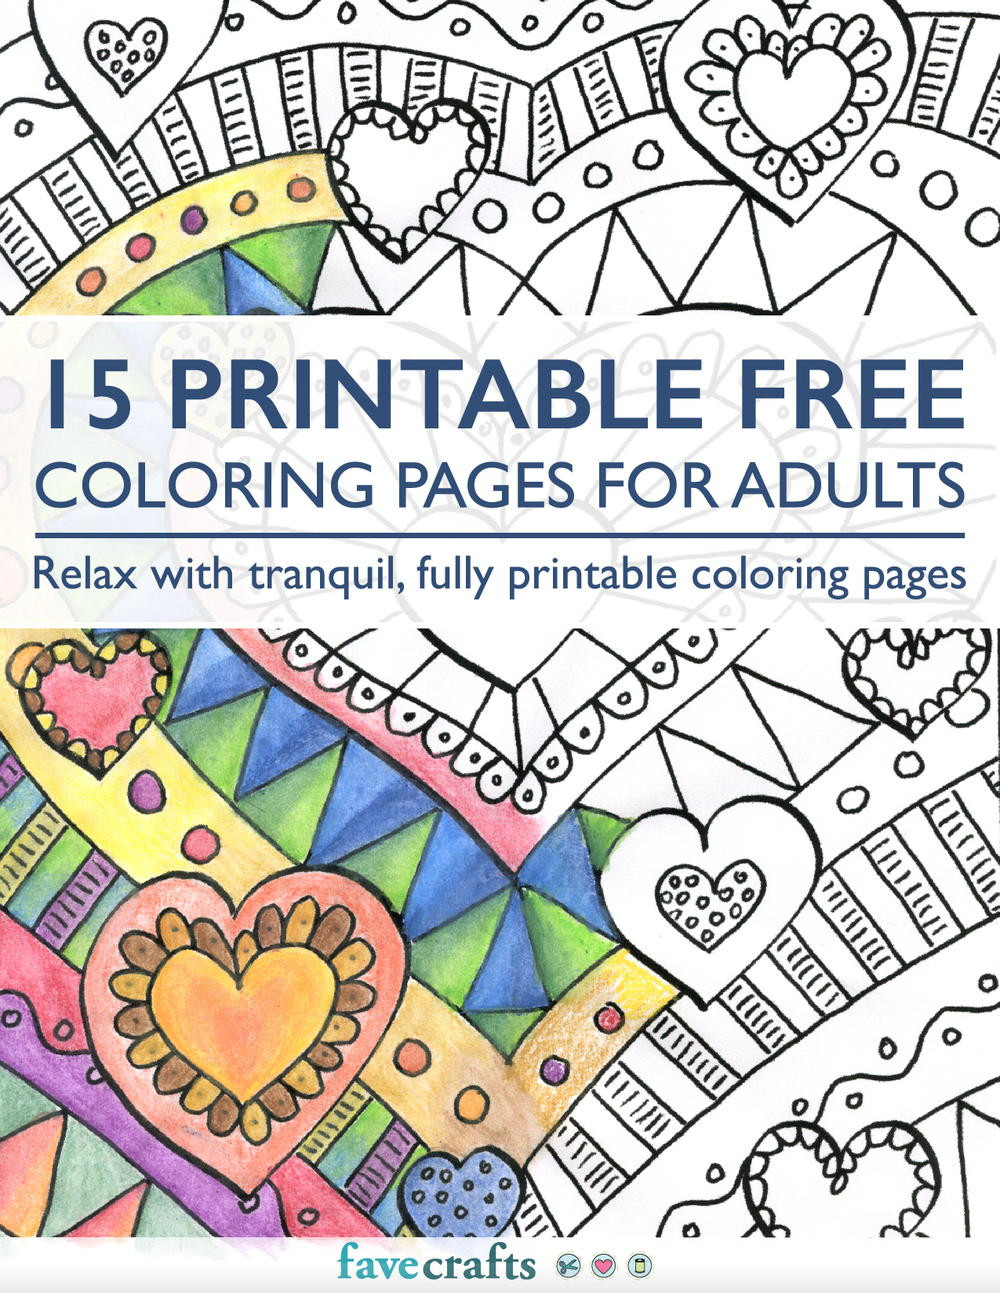 Large Coloring Books For Adults
 15 Printable Free Coloring Pages for Adults [PDF